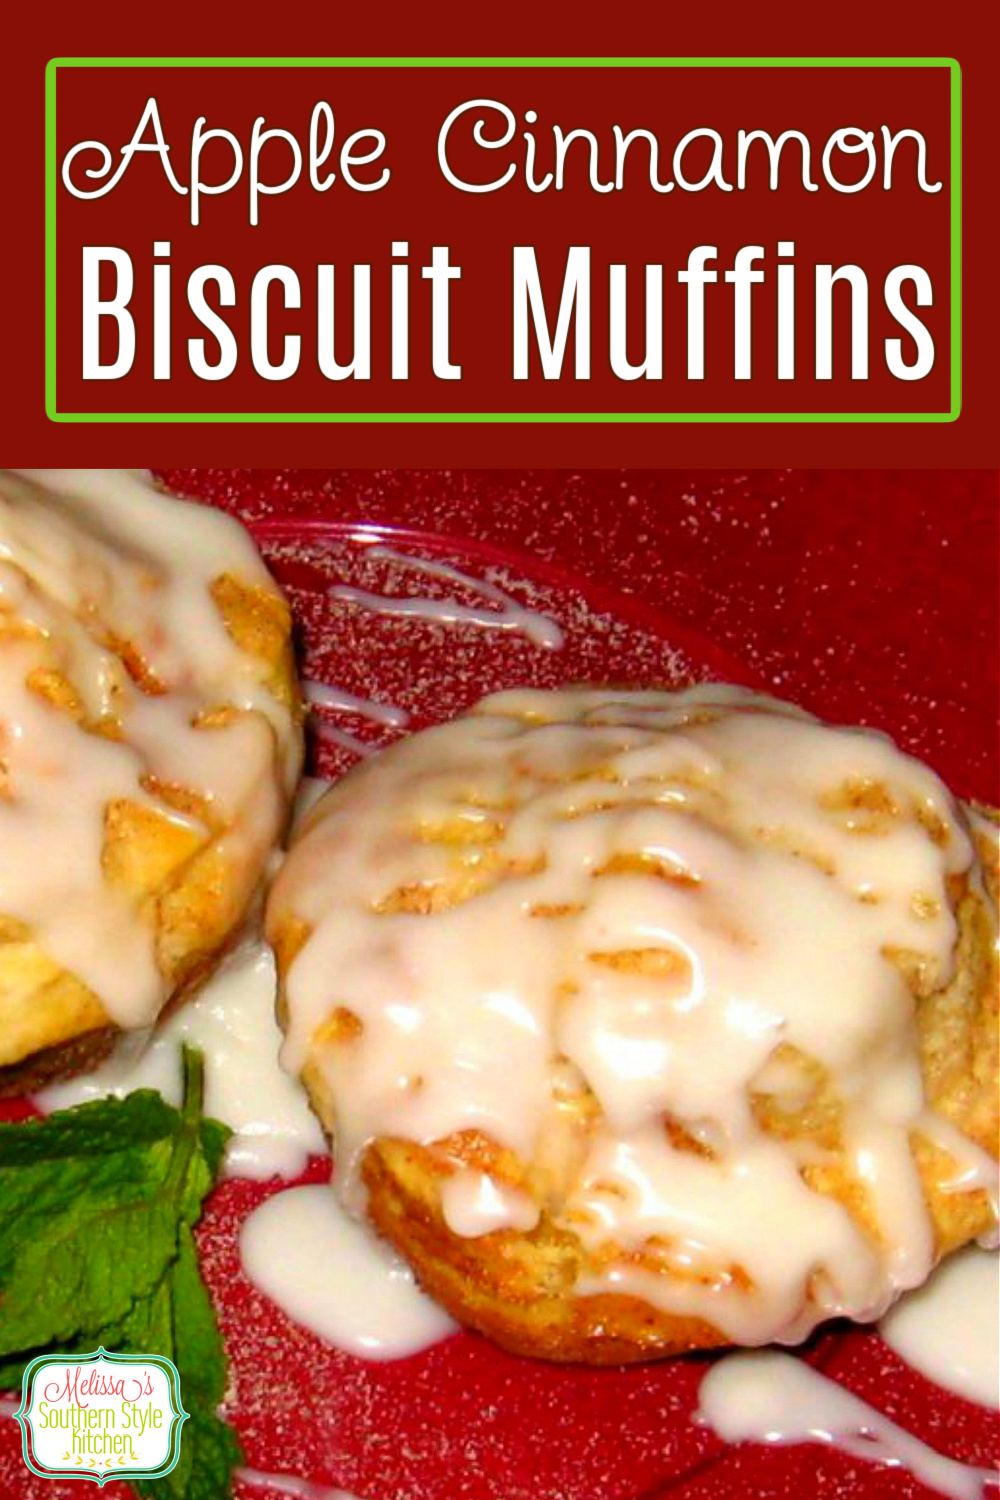 Make a fresh start to your day with these delicious Apple Cinnamon Biscuit Muffins #applemuffins #biscuits #cinnamonapples #biscuitmuffins #applebiscuits #biscuitrecipes #southernbiscuits #brunch #fallbaking #holidaybaking #southernrecipes #southernfood #cinnamonbiscuits via @melissasssk